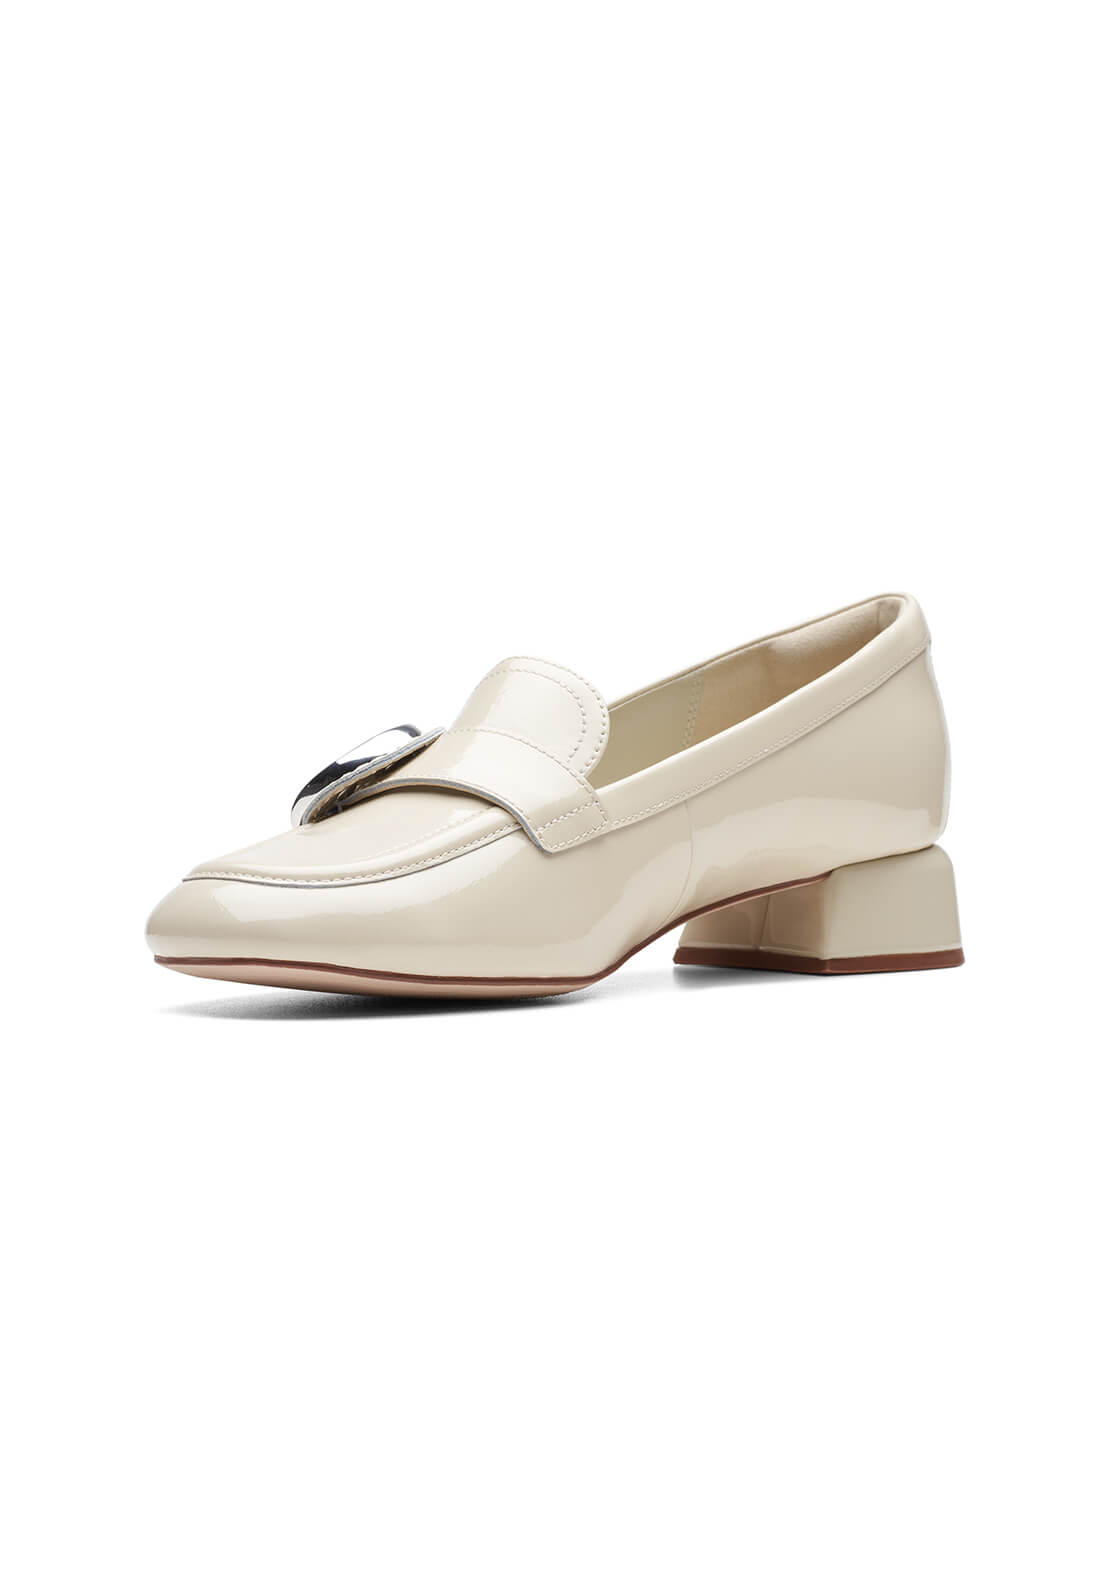 Clarks Daiss30 Trim Heeled Loafer - Ivory 1 Shaws Department Stores